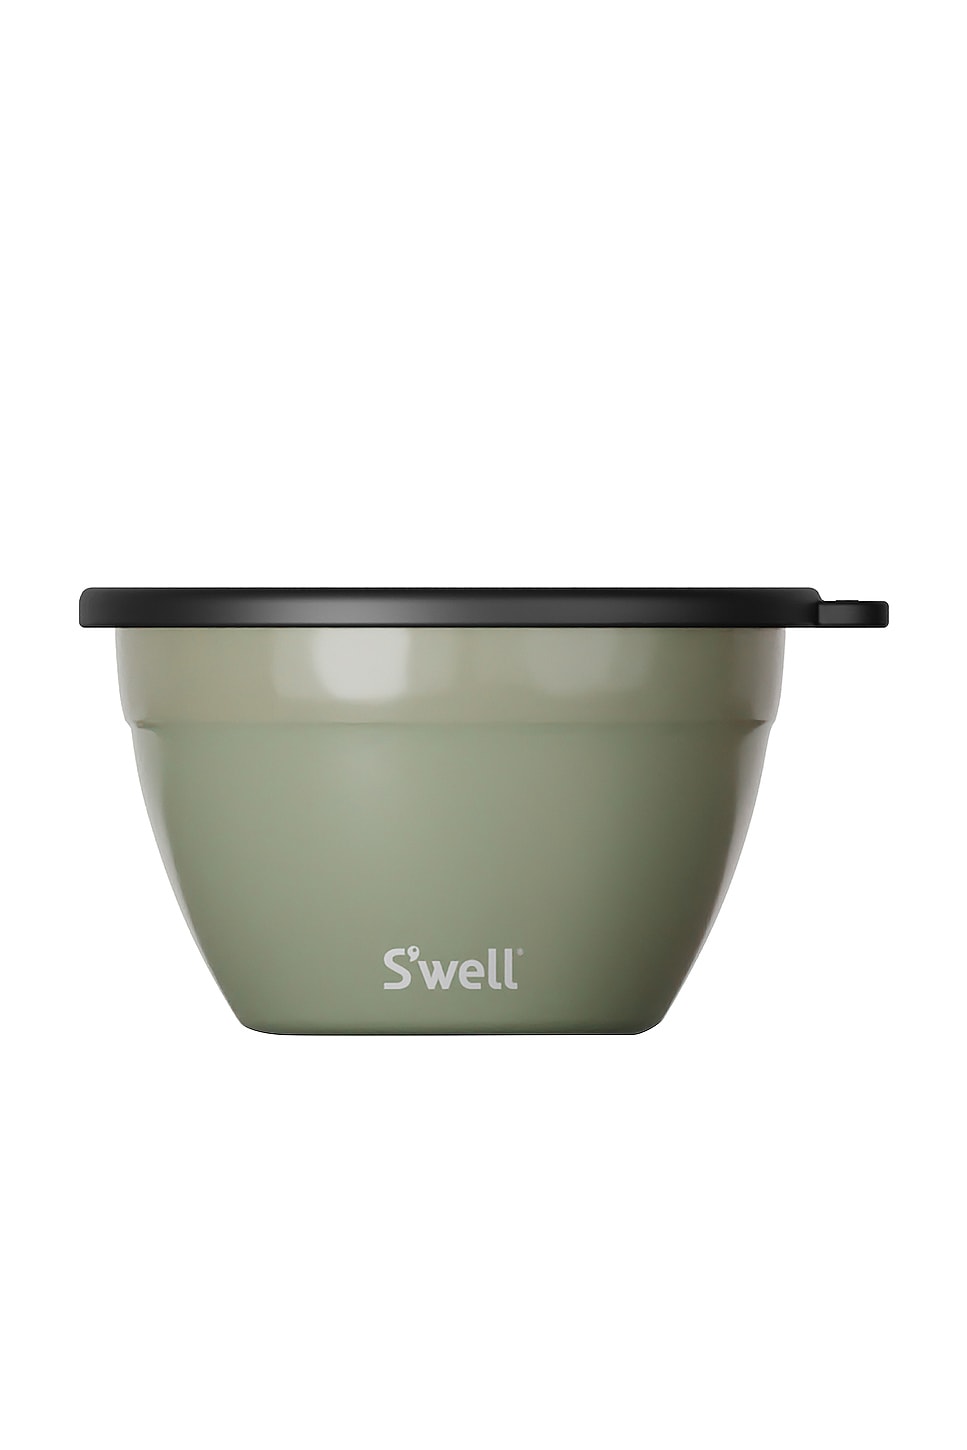 Get Your Greens In With The Salad Bowl Kit - S'well